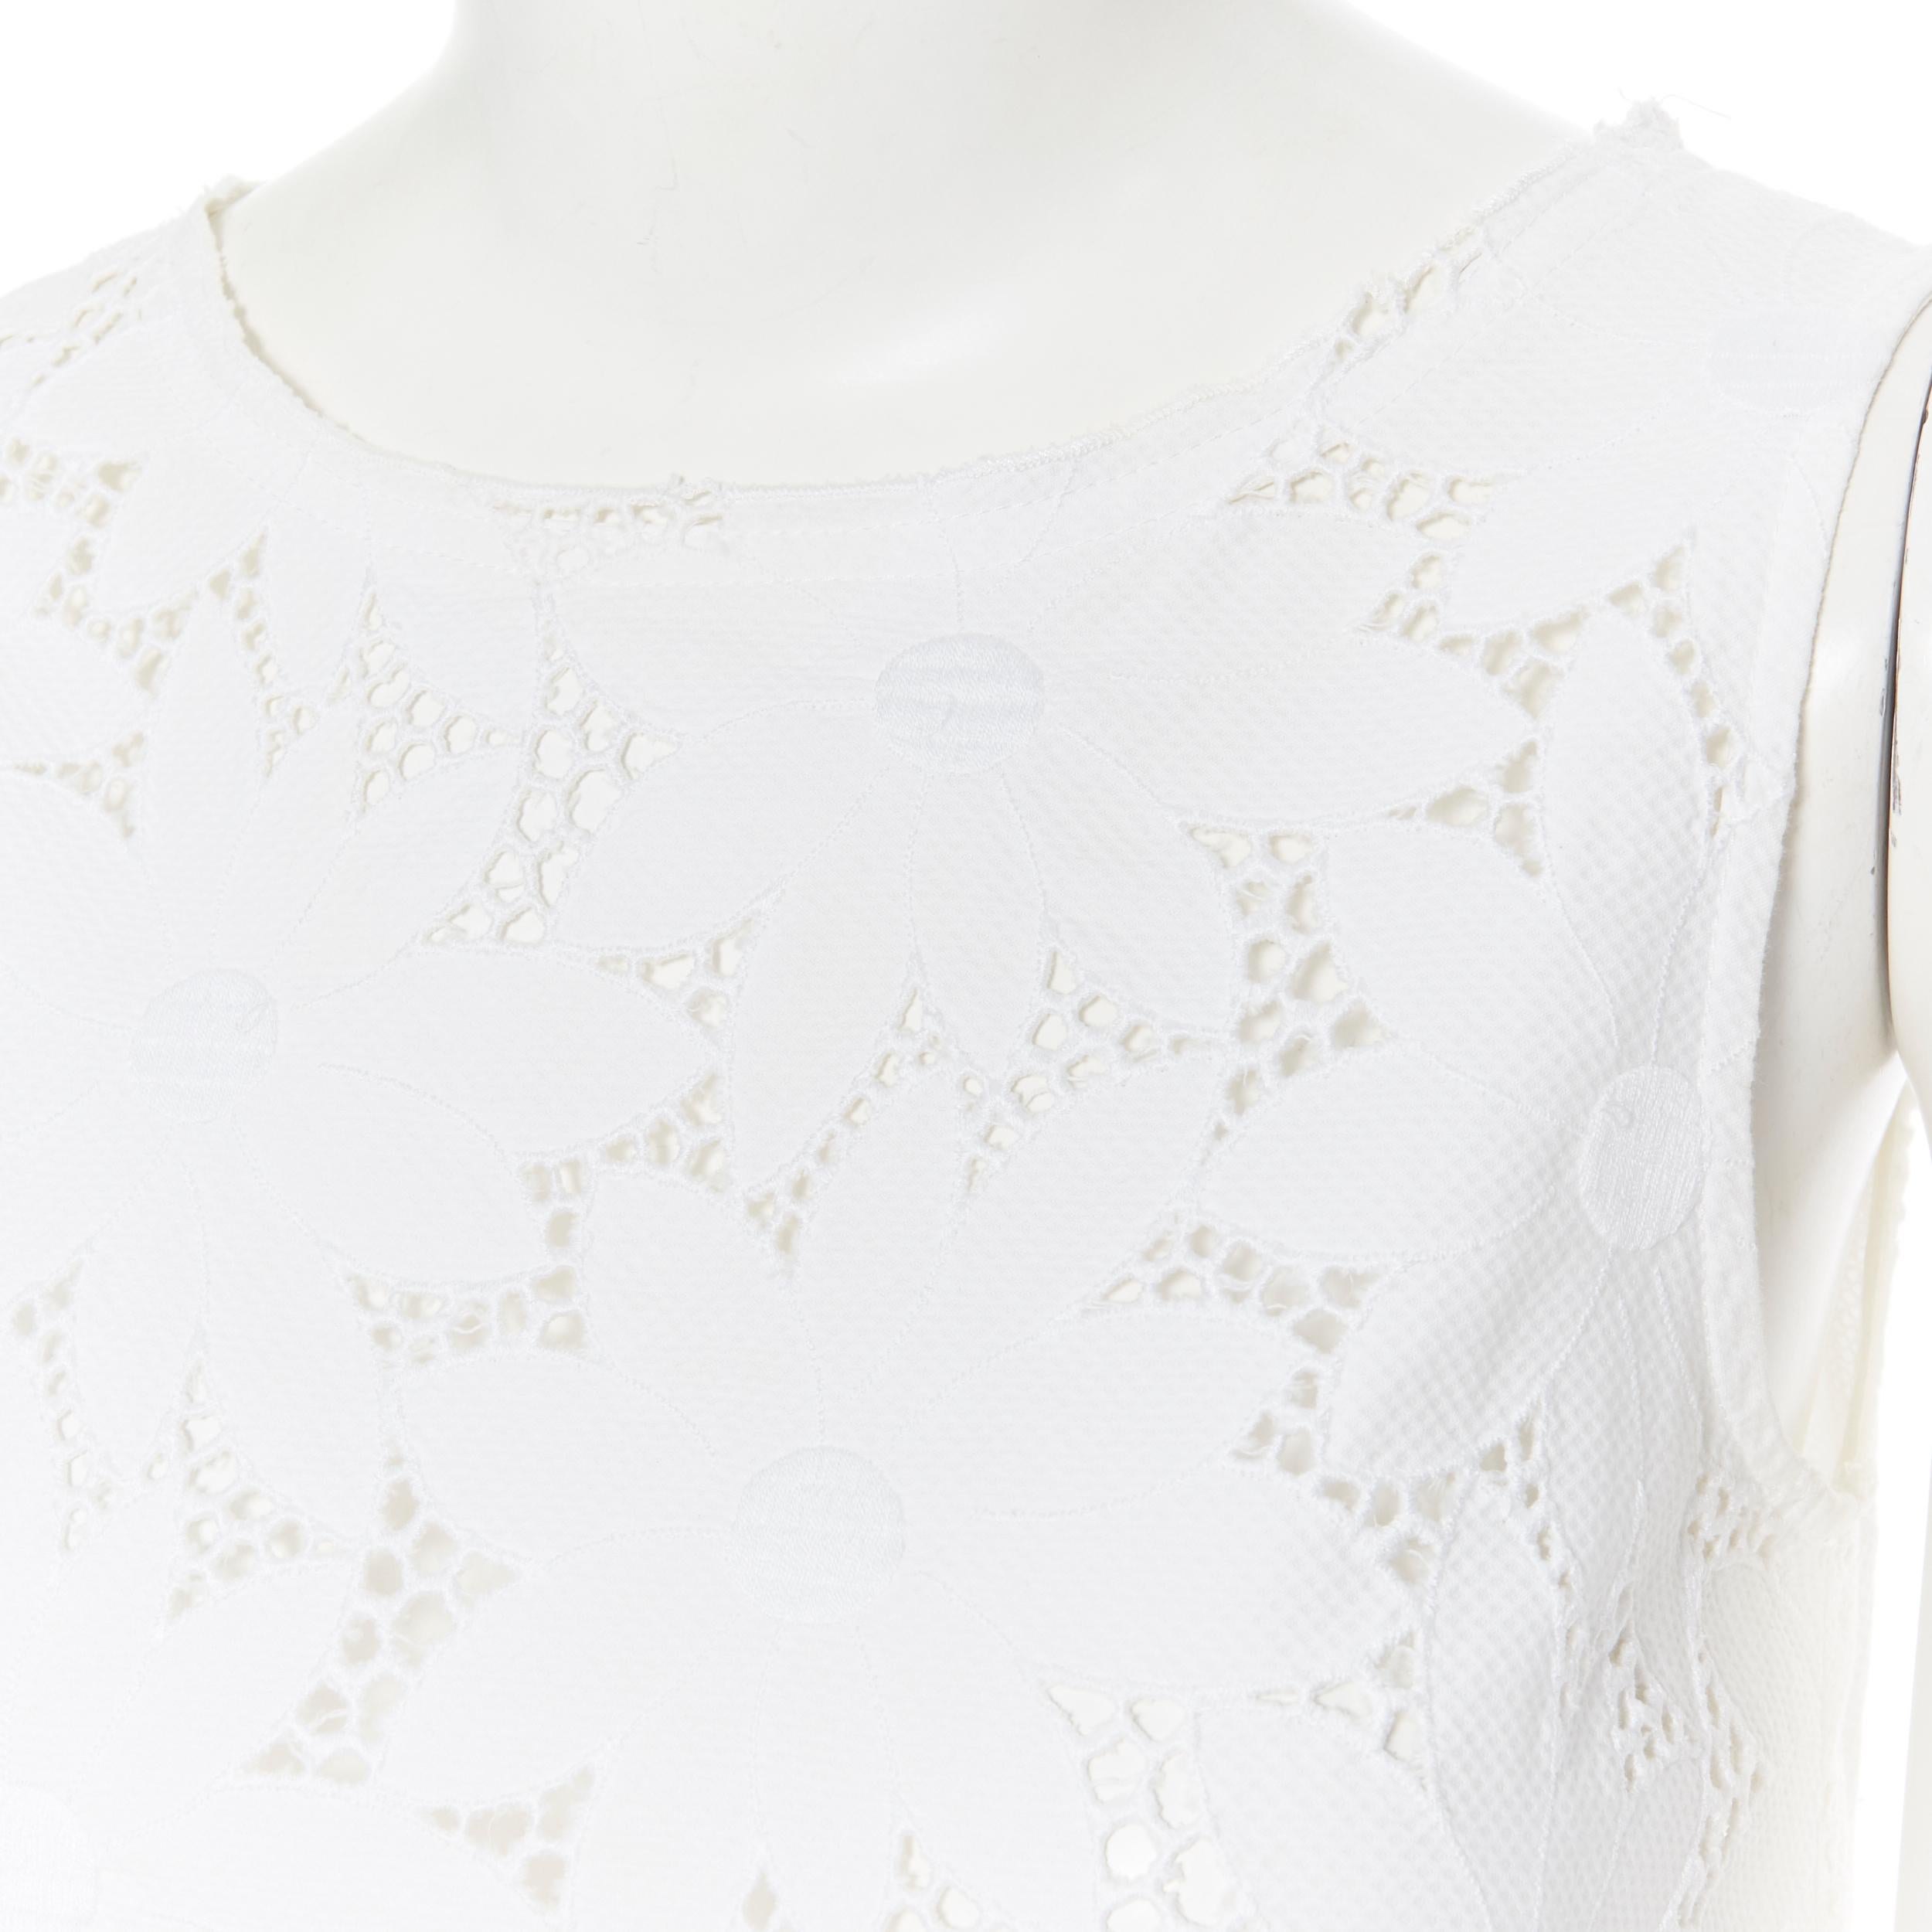 LISA PERRY 100% cotton white floral embroidery anglaise A-line sleeveless top S 
Reference: LNKO/A01260 
Brand: Lisa Perry 
Material: Cotton 
Color: White 
Pattern: Floral 
Extra Detail: Floral embroidery anglaise. Wide neckline. A-line cut. 
Made